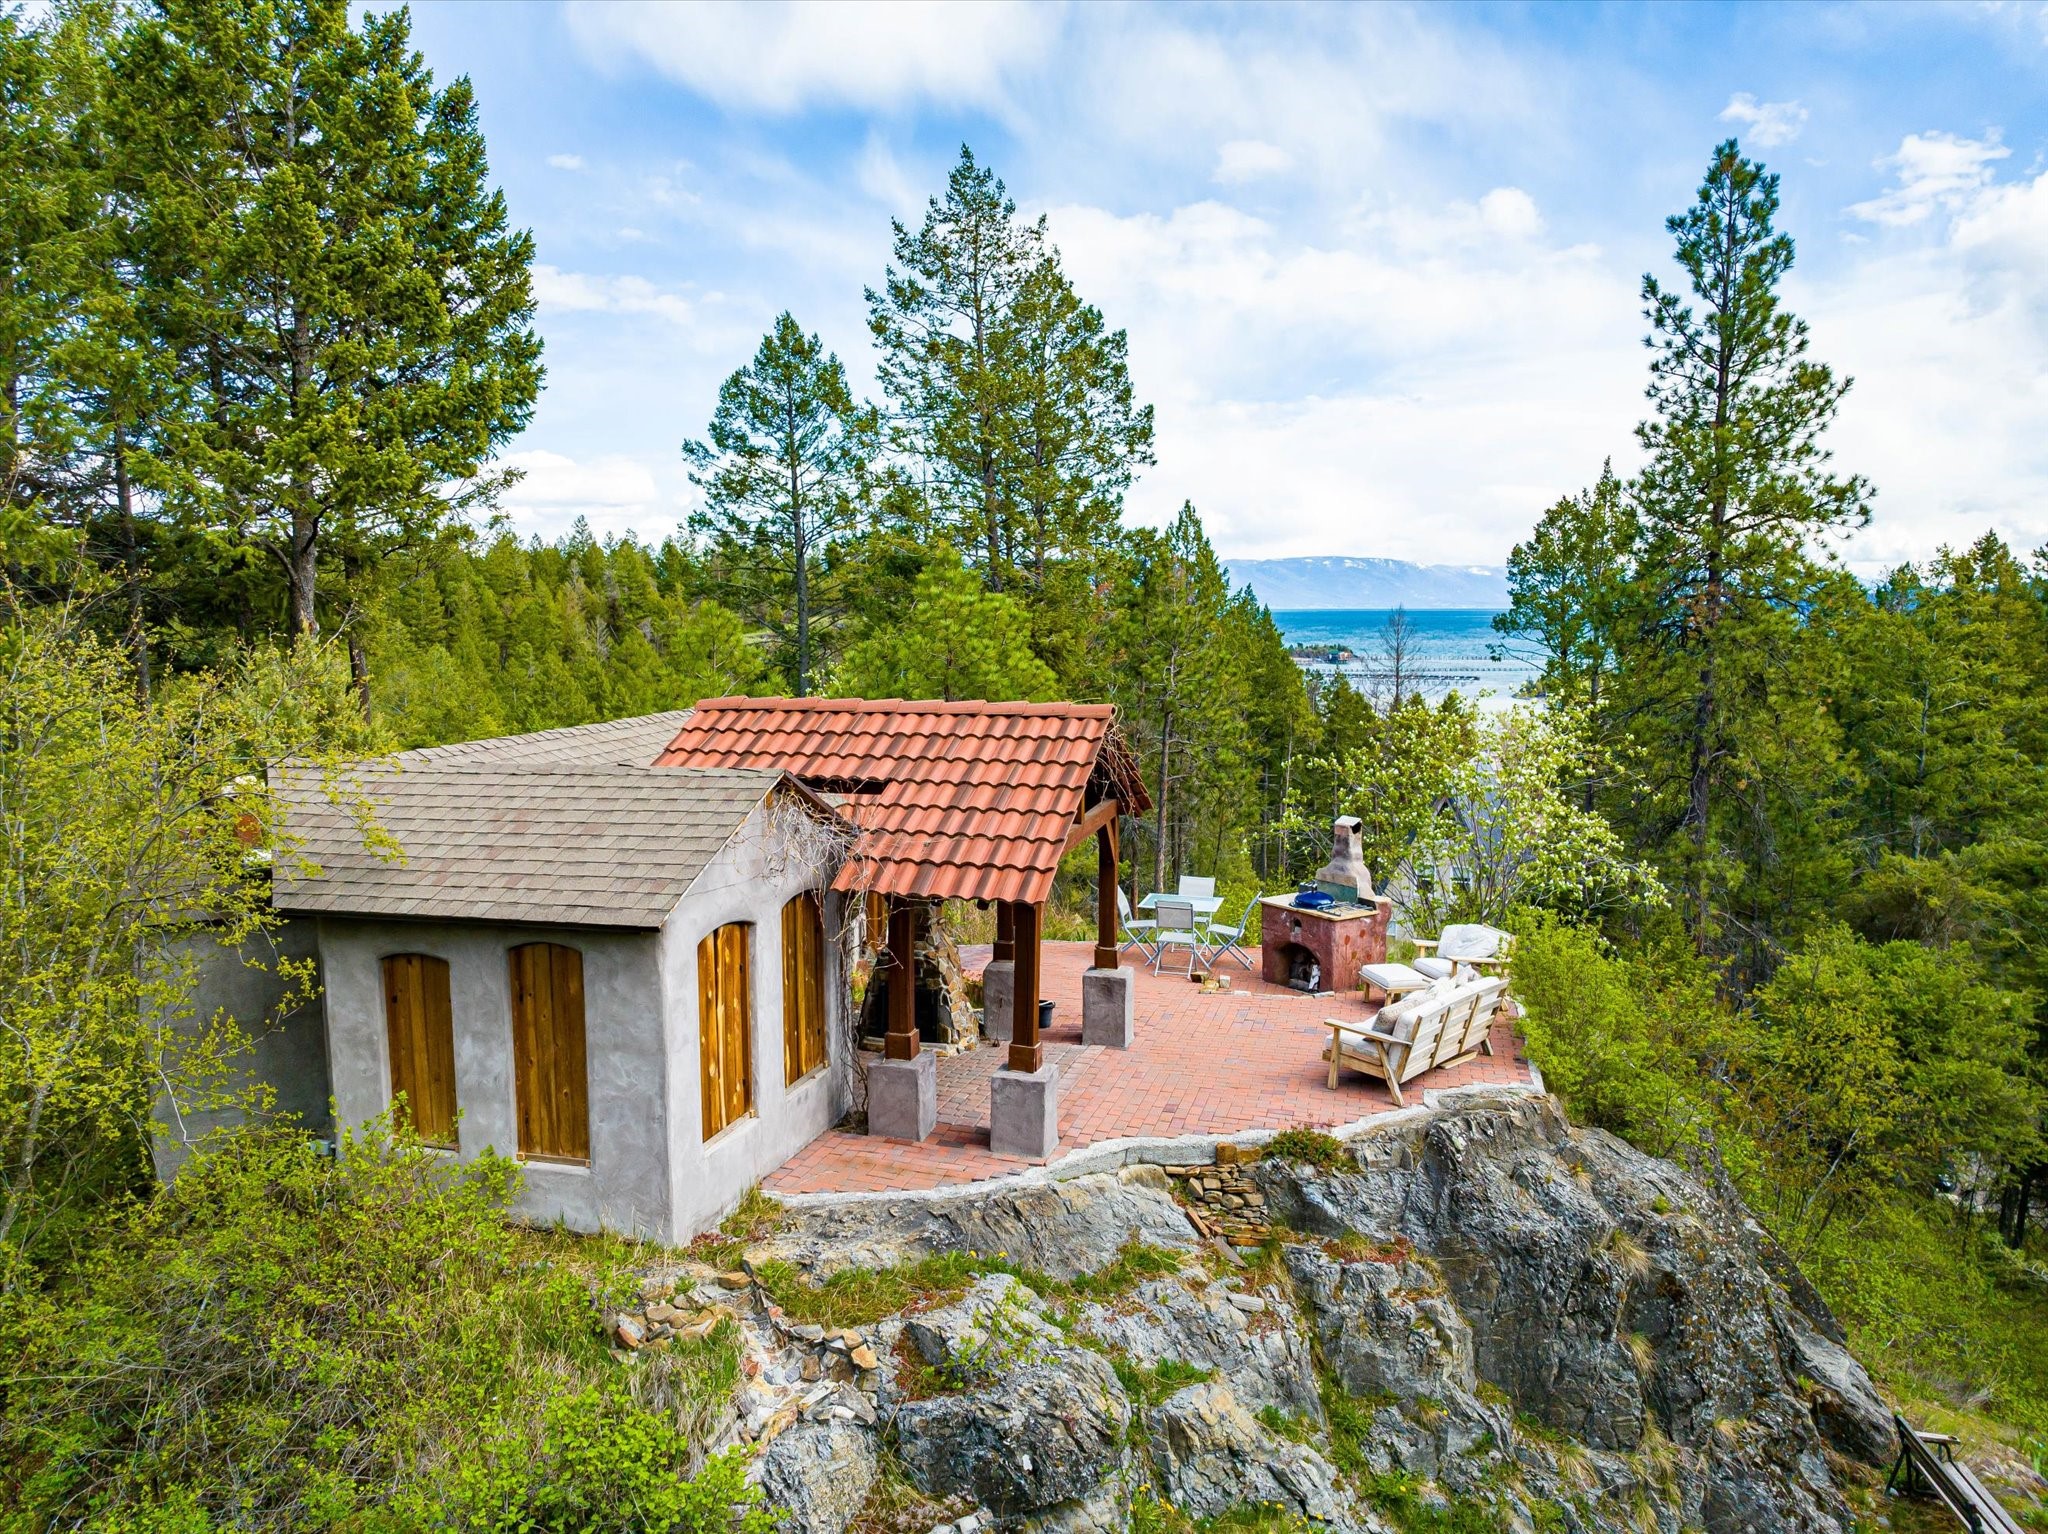 This remarkable property boasts stunning views of Flathead Lake and offers an extremely lush oversized landscaped yard where you will discover several tranquil garden nooks. Experience the enjoyment and ambiance of the enchanting Pizza Grotto placed up high on a rock plateau which features indoor-outdoor seating, & patio with multiple fireplaces, while admiring the gorgeous views of Somer's Bay. This property is a true gem! This large home offers separation of space and could possibly be used as a vacation rental. The bedrooms on the first story have an additional separate outside entrance. The second story features an airy kitchen & living room with wide open gorgeous views of the lake, a balcony, bedroom & 3/4 bath. Third floor is a large open great room with amazing views and another balcony. This very desired location is in close proximity to Somer's Boat Launch,& beach.  Please call Shelly Ragland (406) 261-5040 or Hamilton Ash (406)212-0381, or your real estate professional.